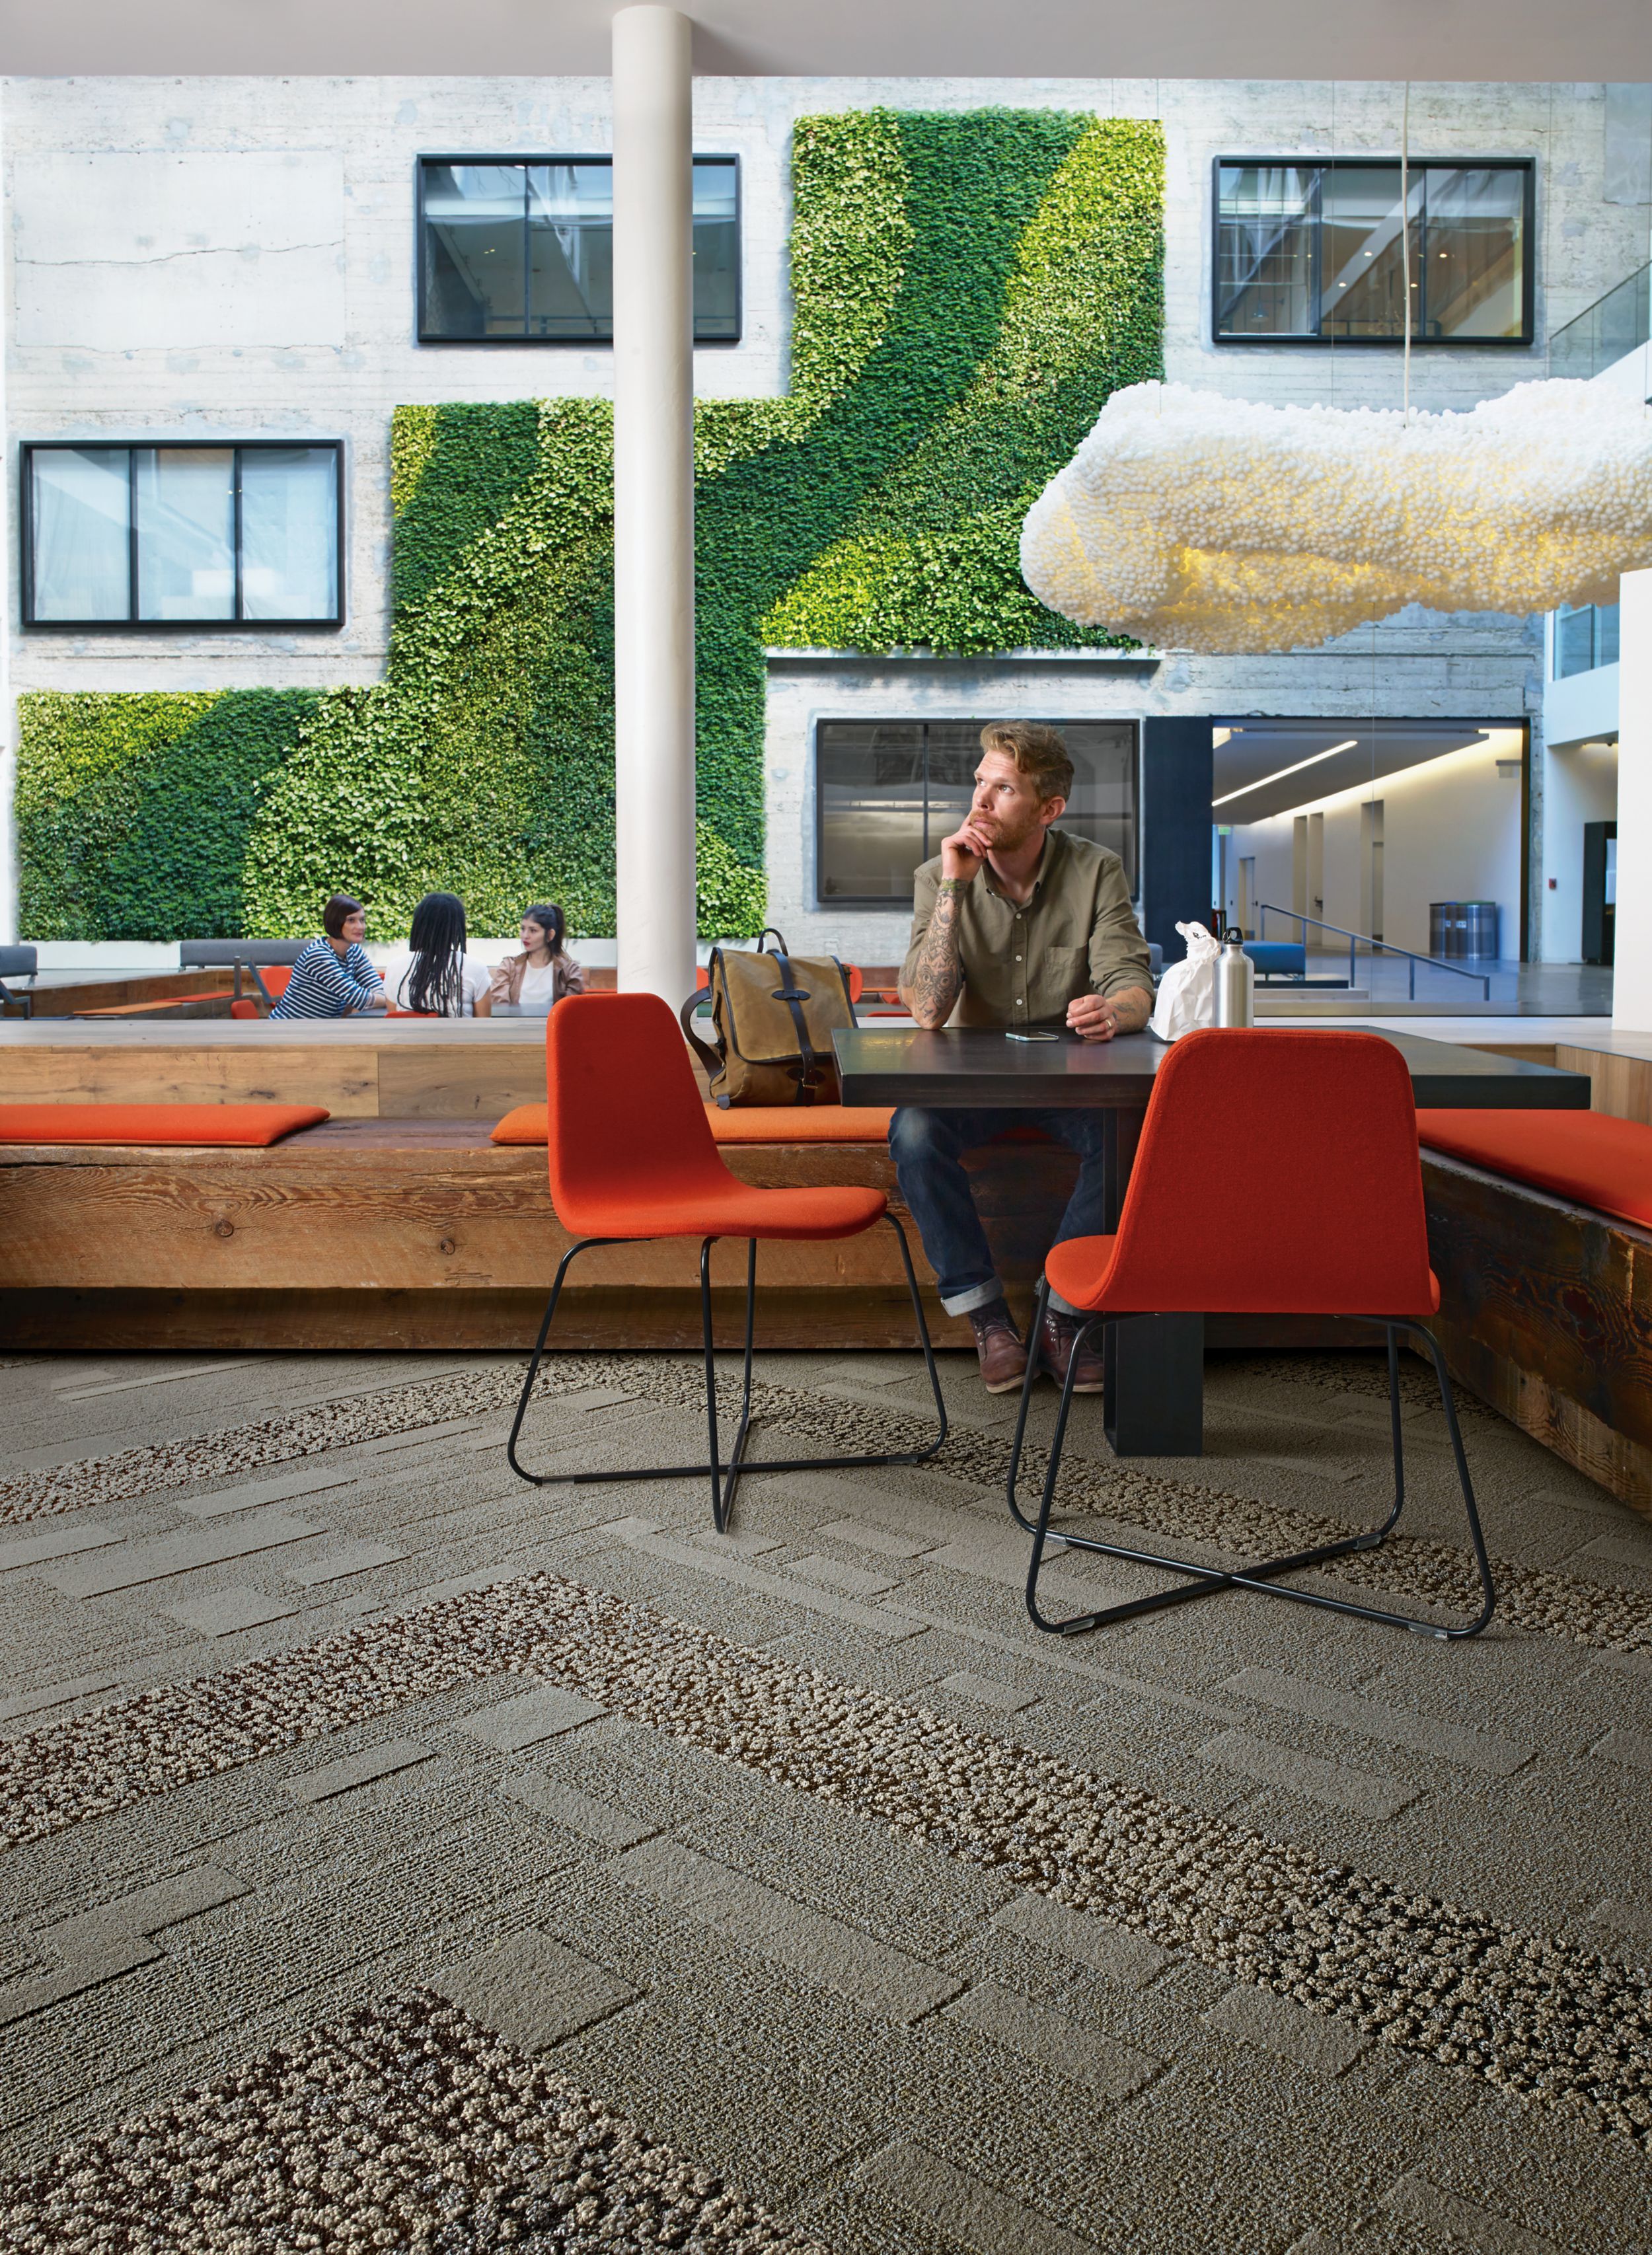 Interface EM552 plank carpet tile with man sitting at table with lunch and group meeting in front of vine wall in the background  Bildnummer 3